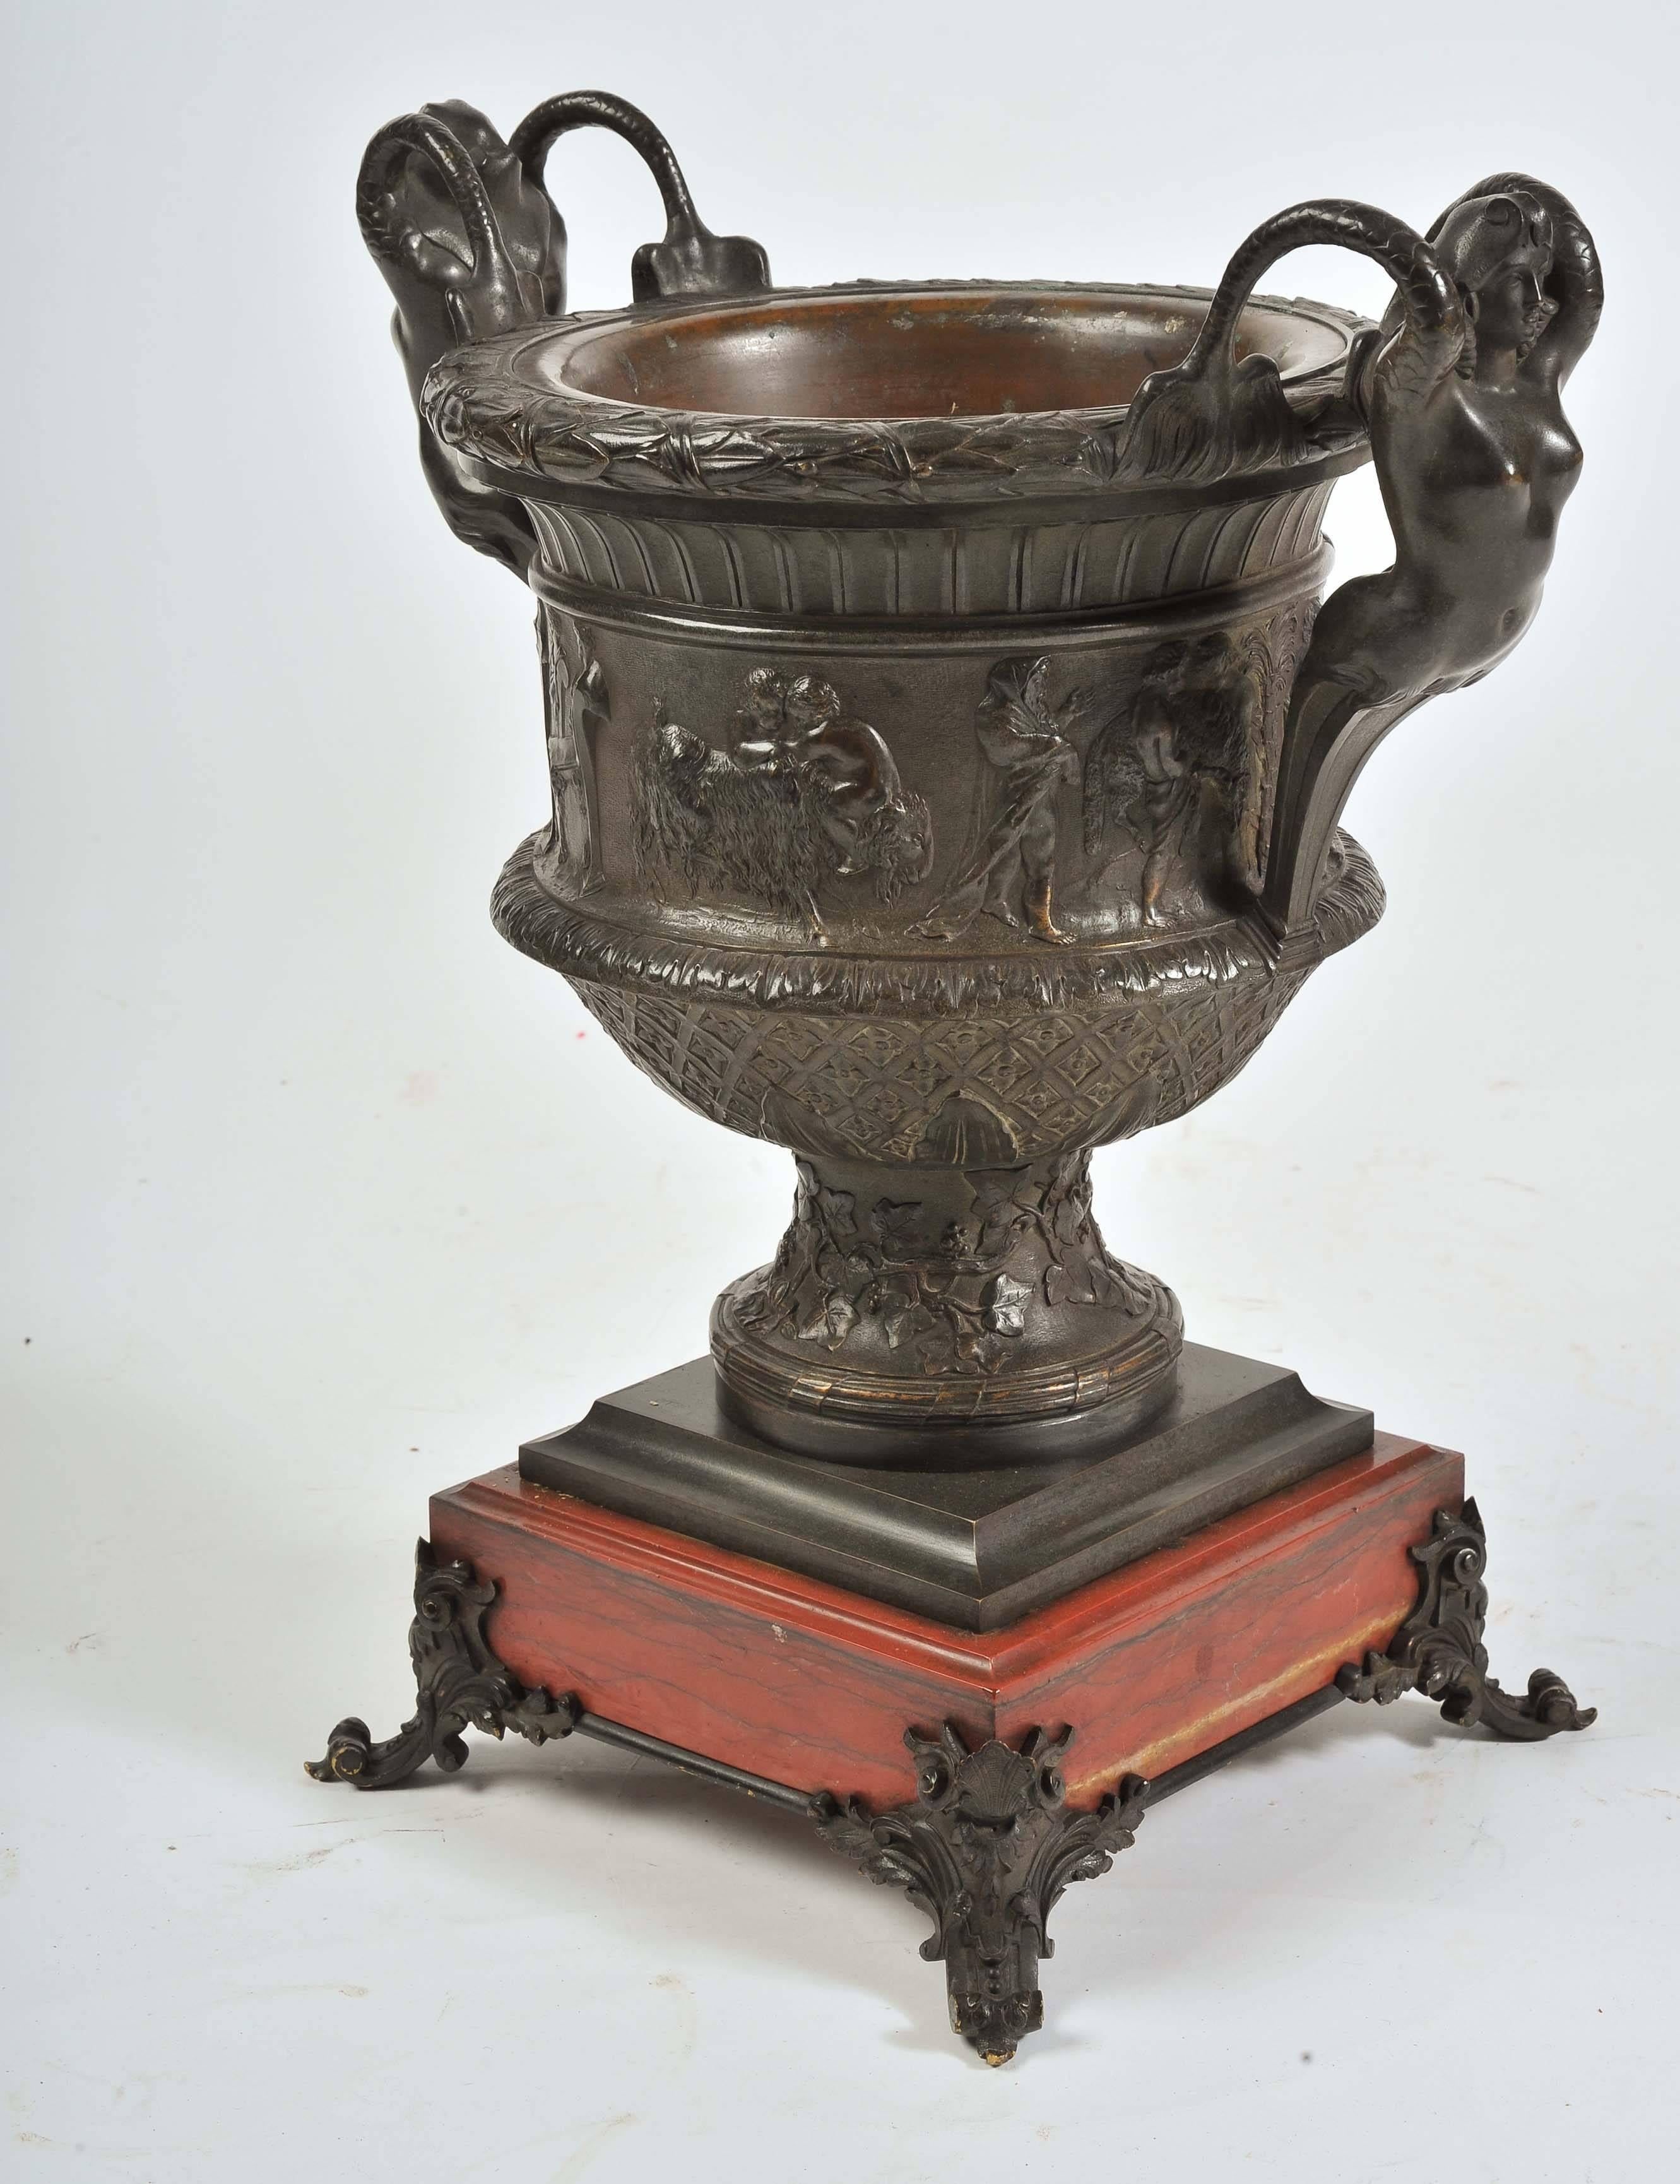 A very good quality French 19th century bronze two handled urn, having nude female figures to either side. Classical bacchus influenced scenes around the urn, foliate decoration to base and raised on a rouge marble plinth and bronze scrolling feet.